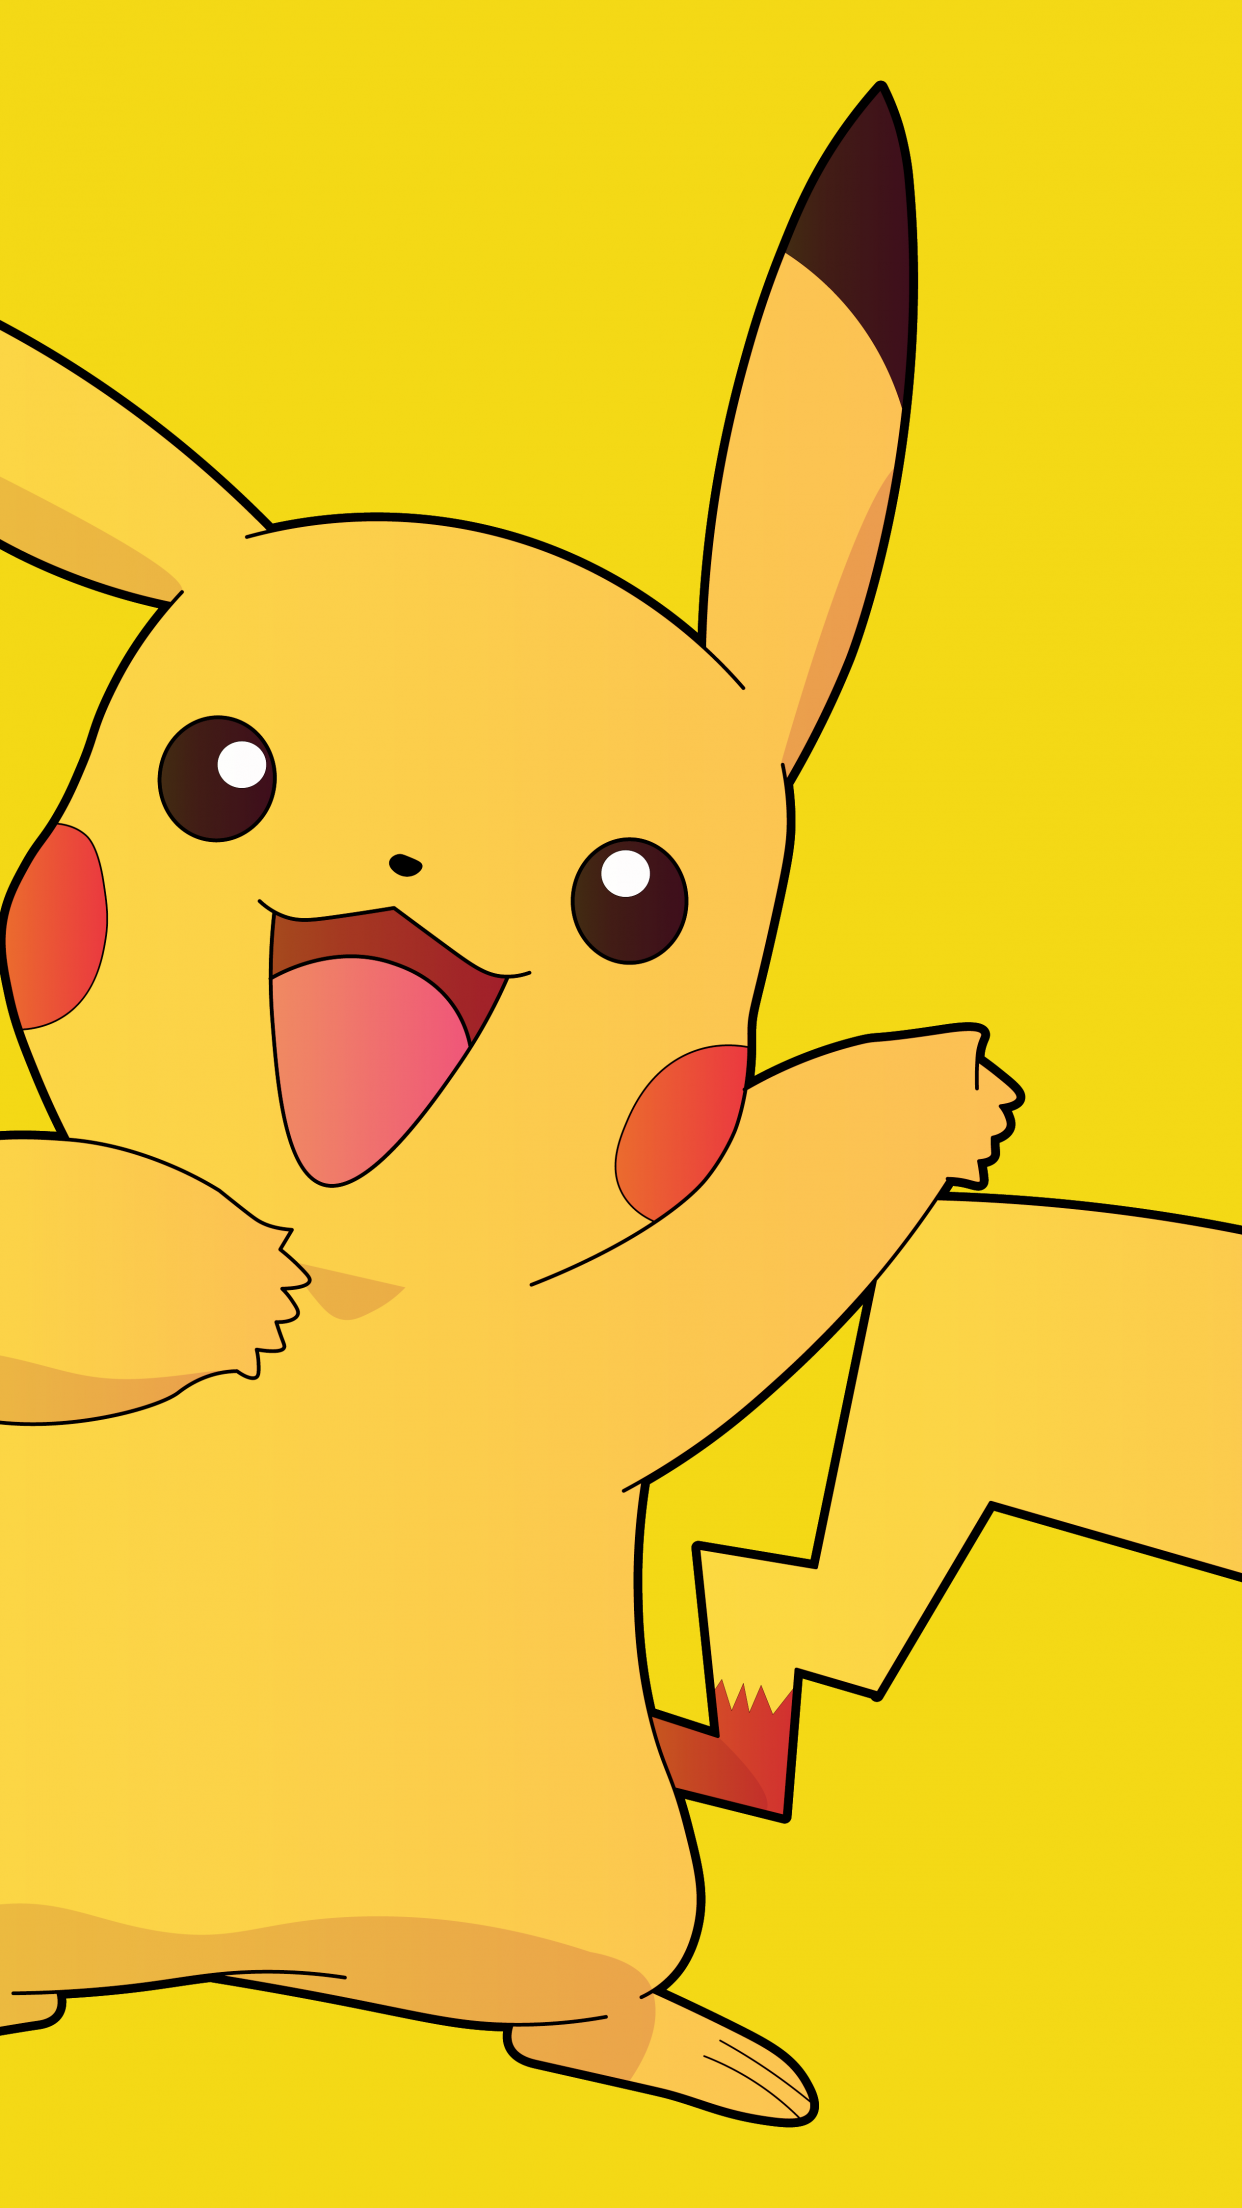 Cool pikachu wallpaper by Lovelynature27  Download on ZEDGE  efff